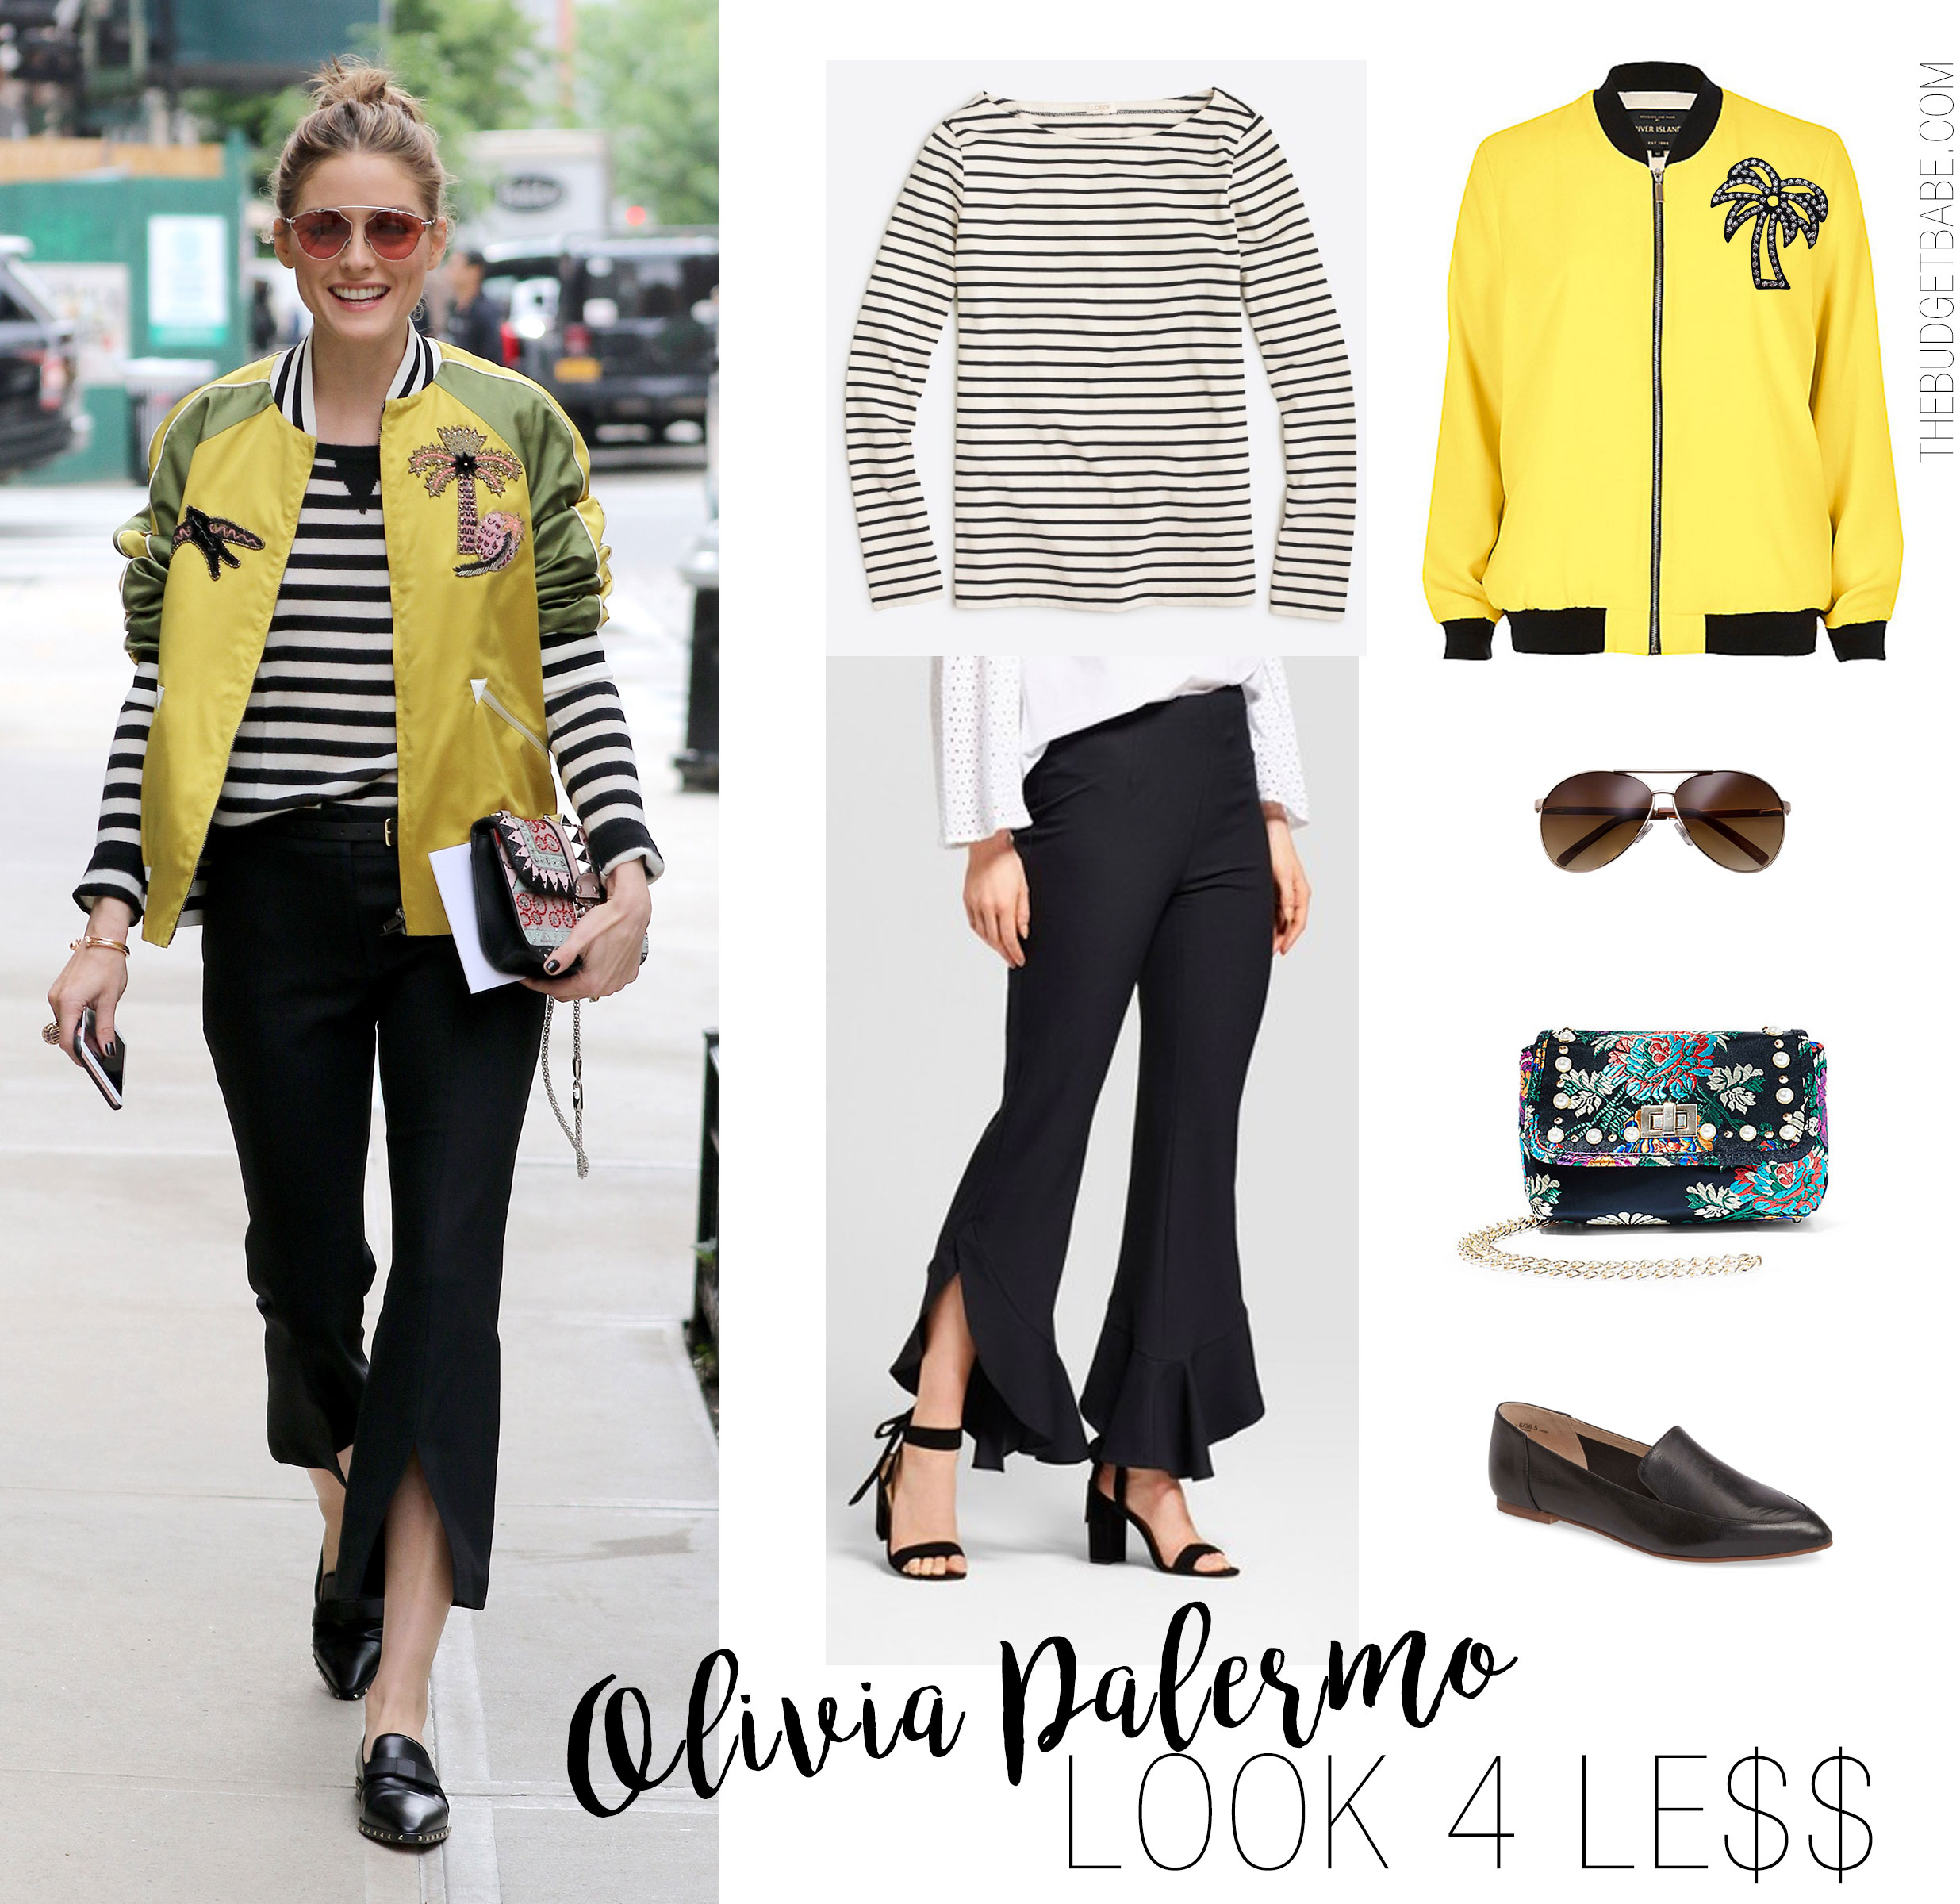 Olivia Palermo wears a yellow satin applique bomber jacket by Valentino with flare cuff pants.